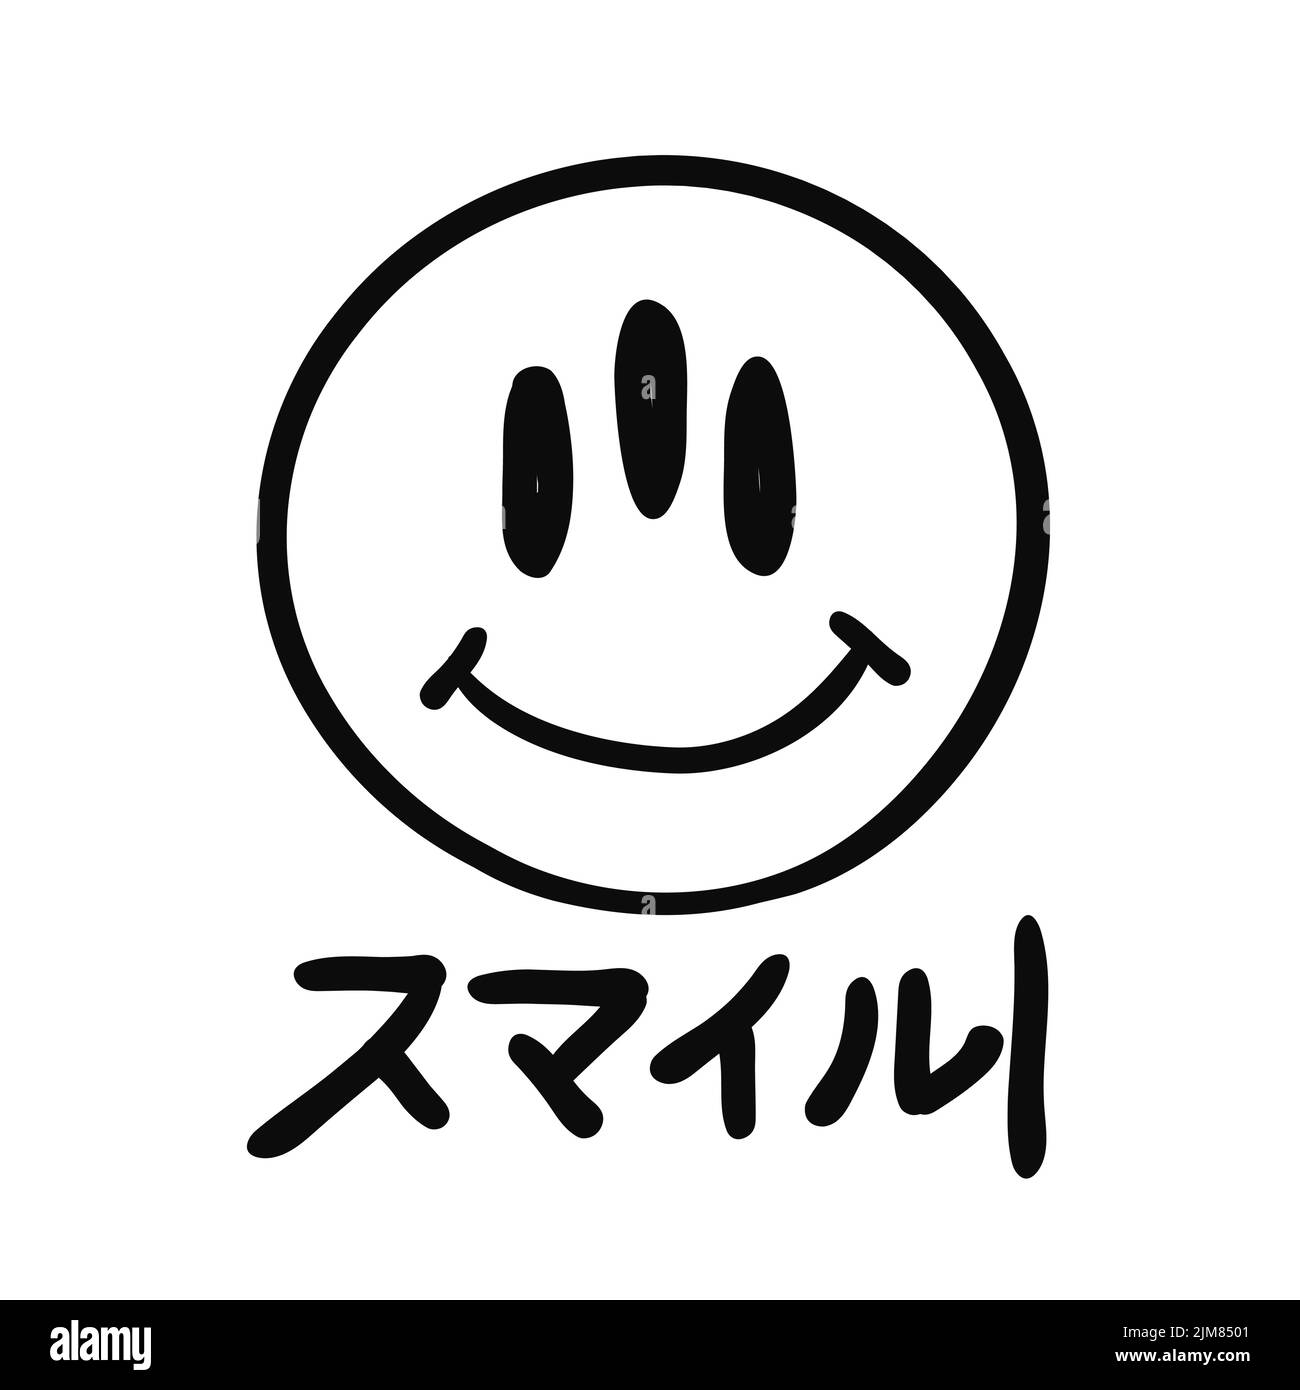 Smiley face sticker Black and White Stock Photos & Images - Alamy